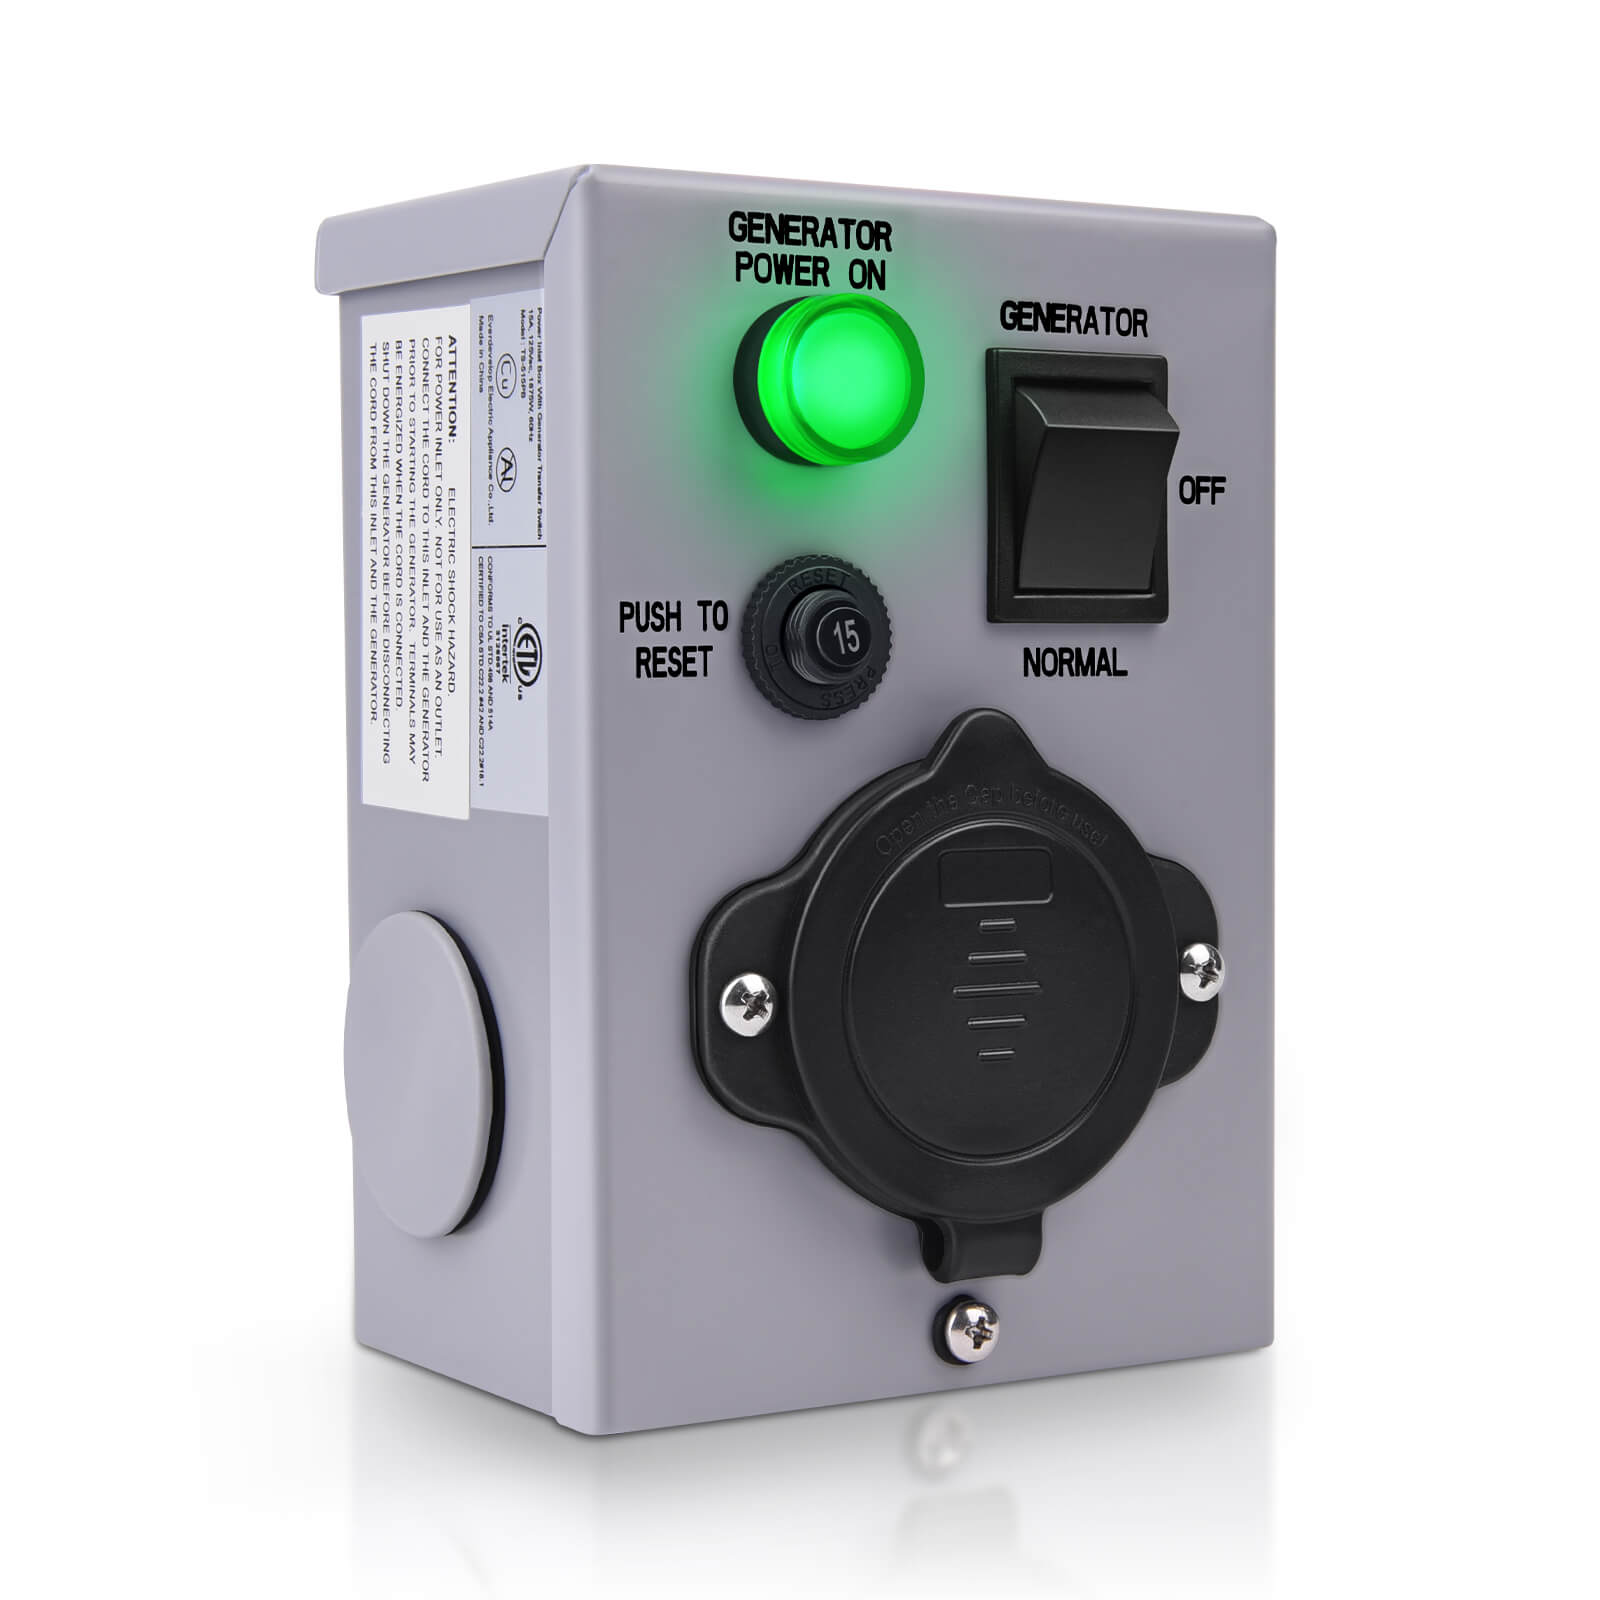 15 Amp 125V Generator Transfer Switch, Power Inlet Box, Waterproof Manual Transfer Switch MICTUNING